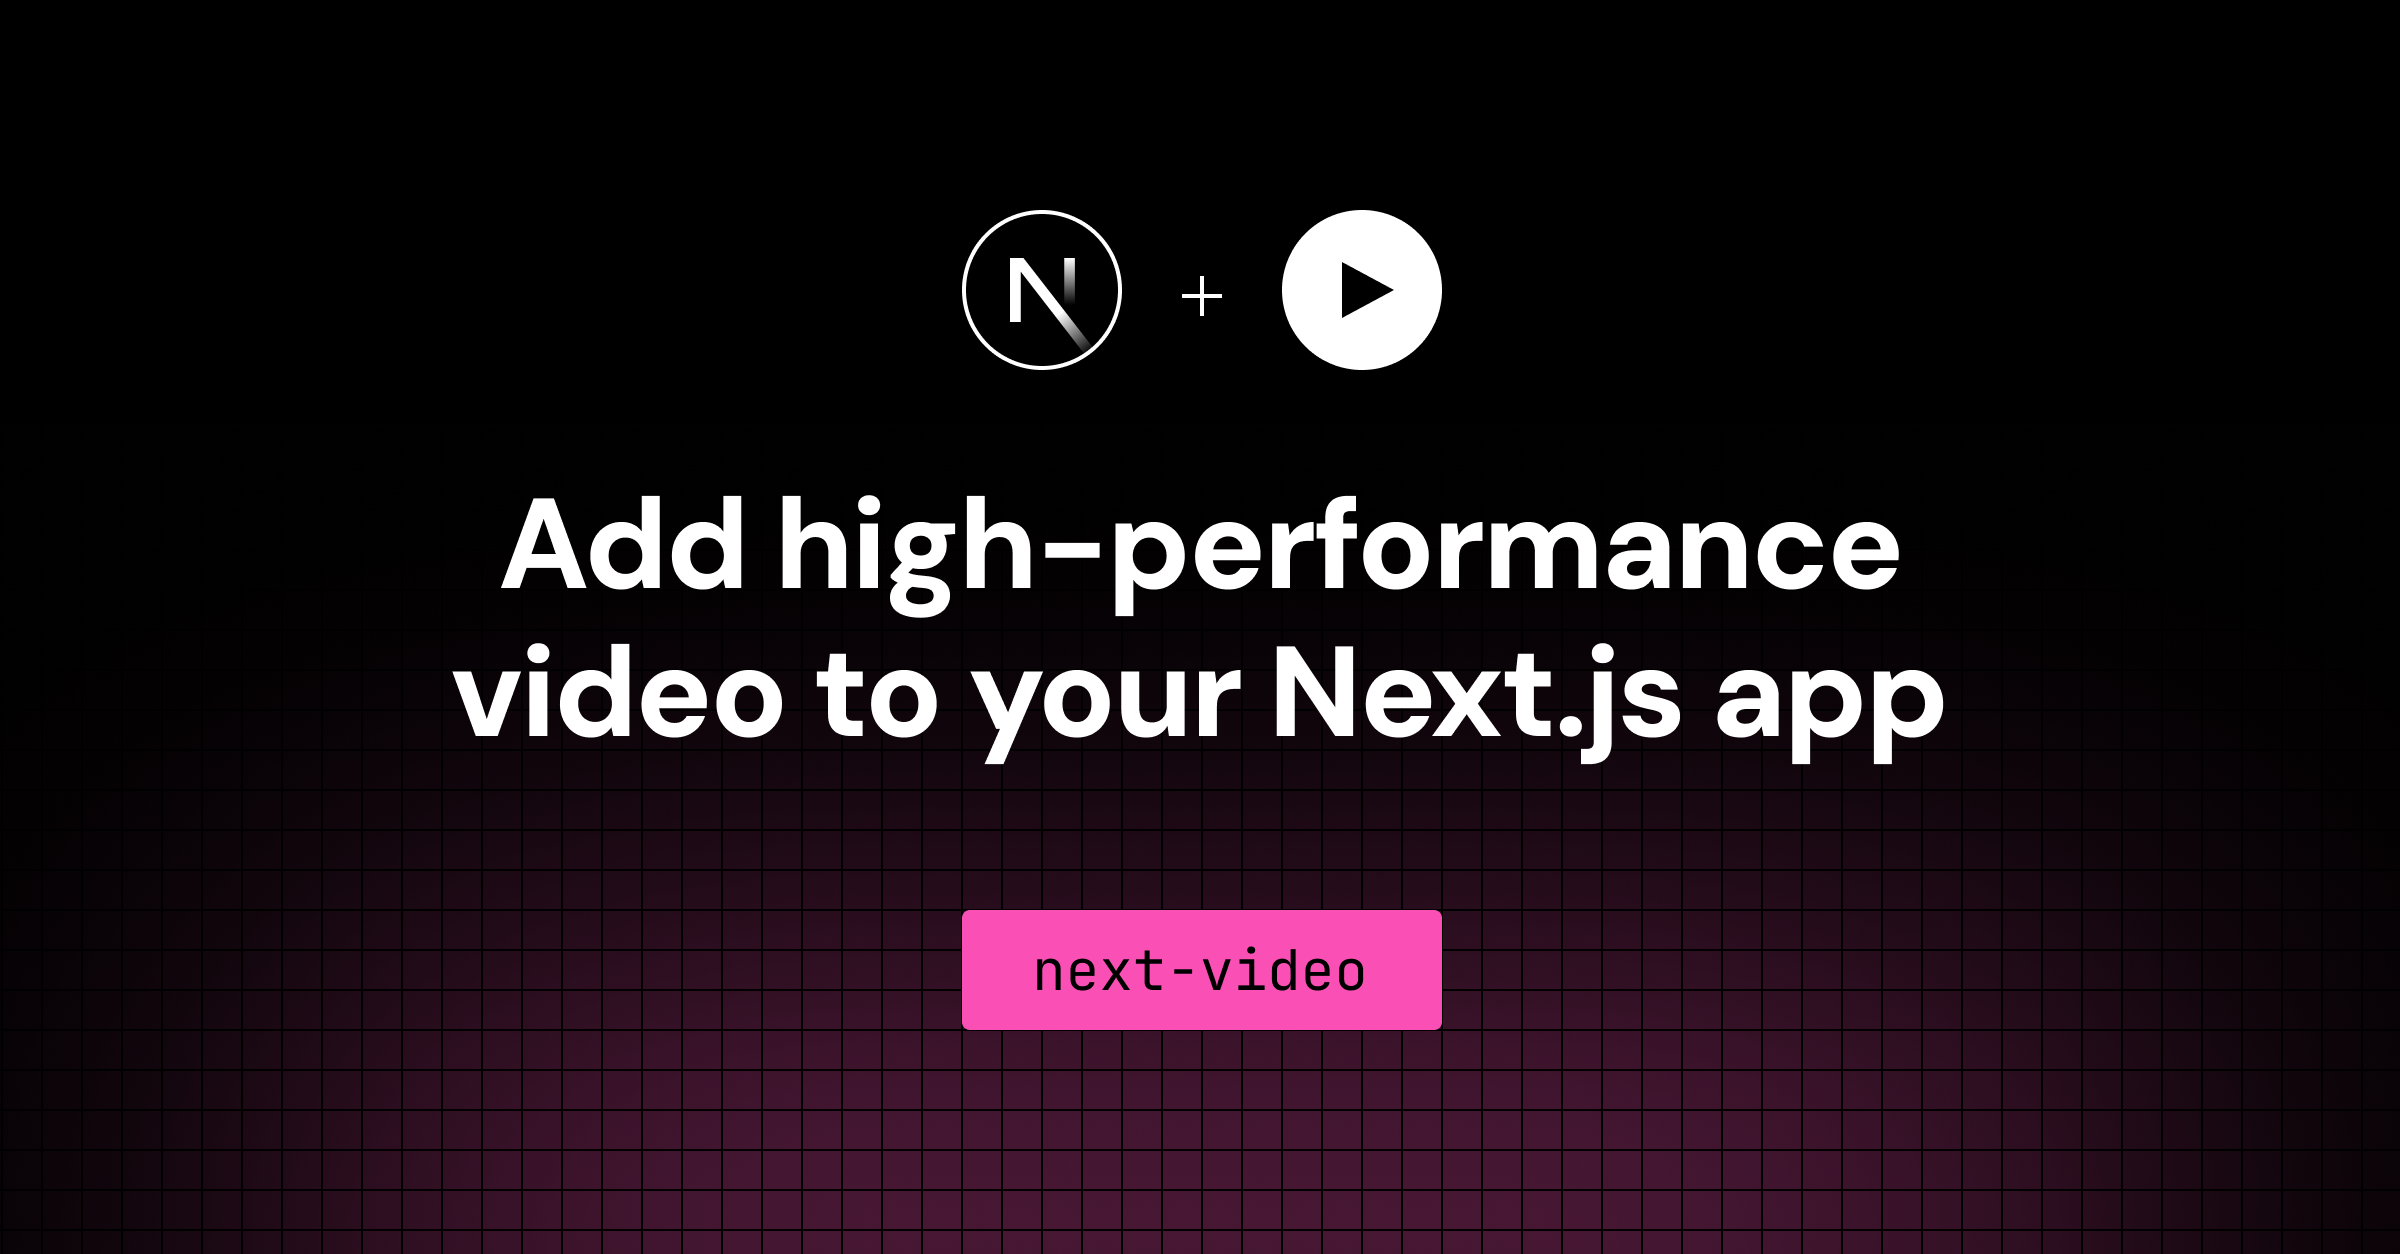 Next.js video embedding with next-video